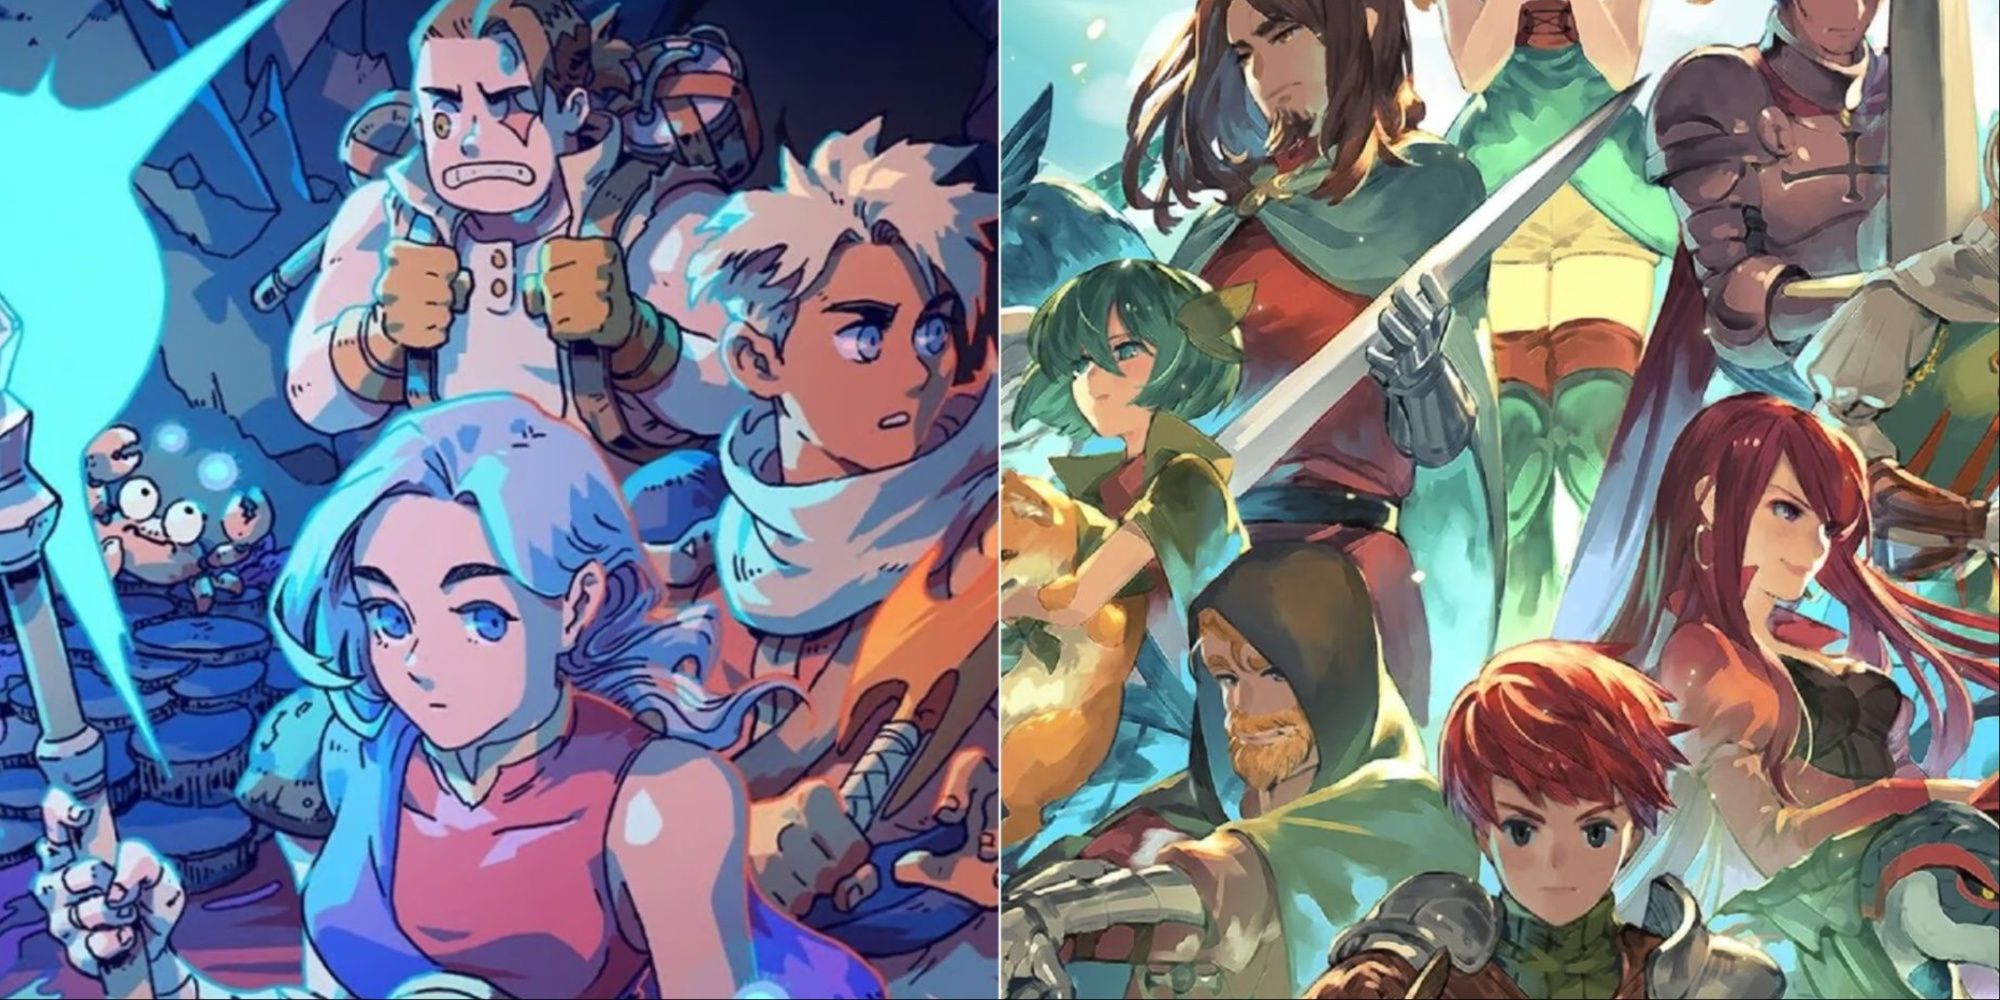 A collage showing the roster of Sea of Stars on the left and the characters of Chained Echoes on the right.